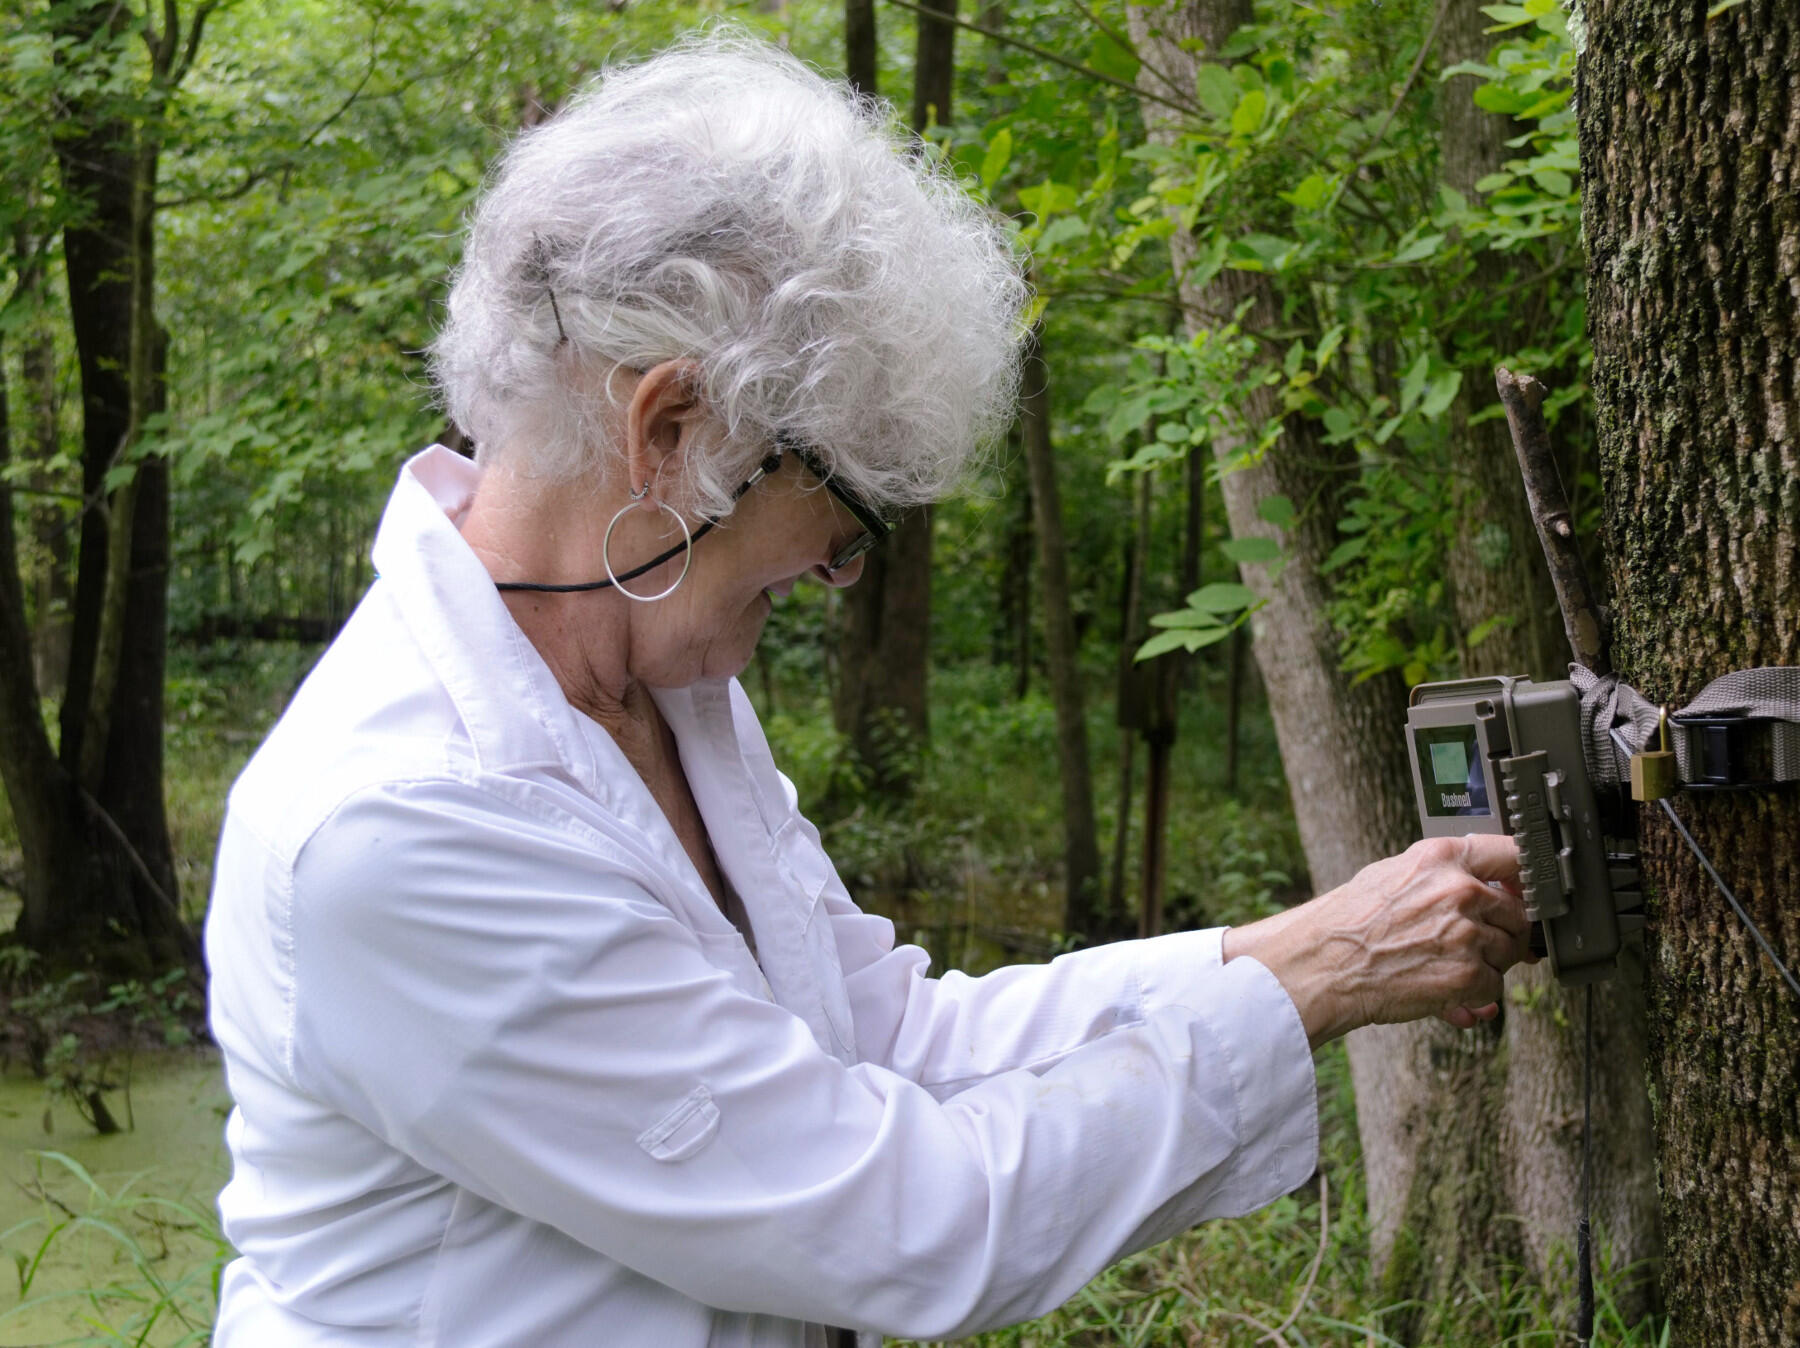 Anne Wright removes a memory card from a wildlife camera in a remote area of the James River Parks System. (Photo by Leah Small, University Public Affairs)